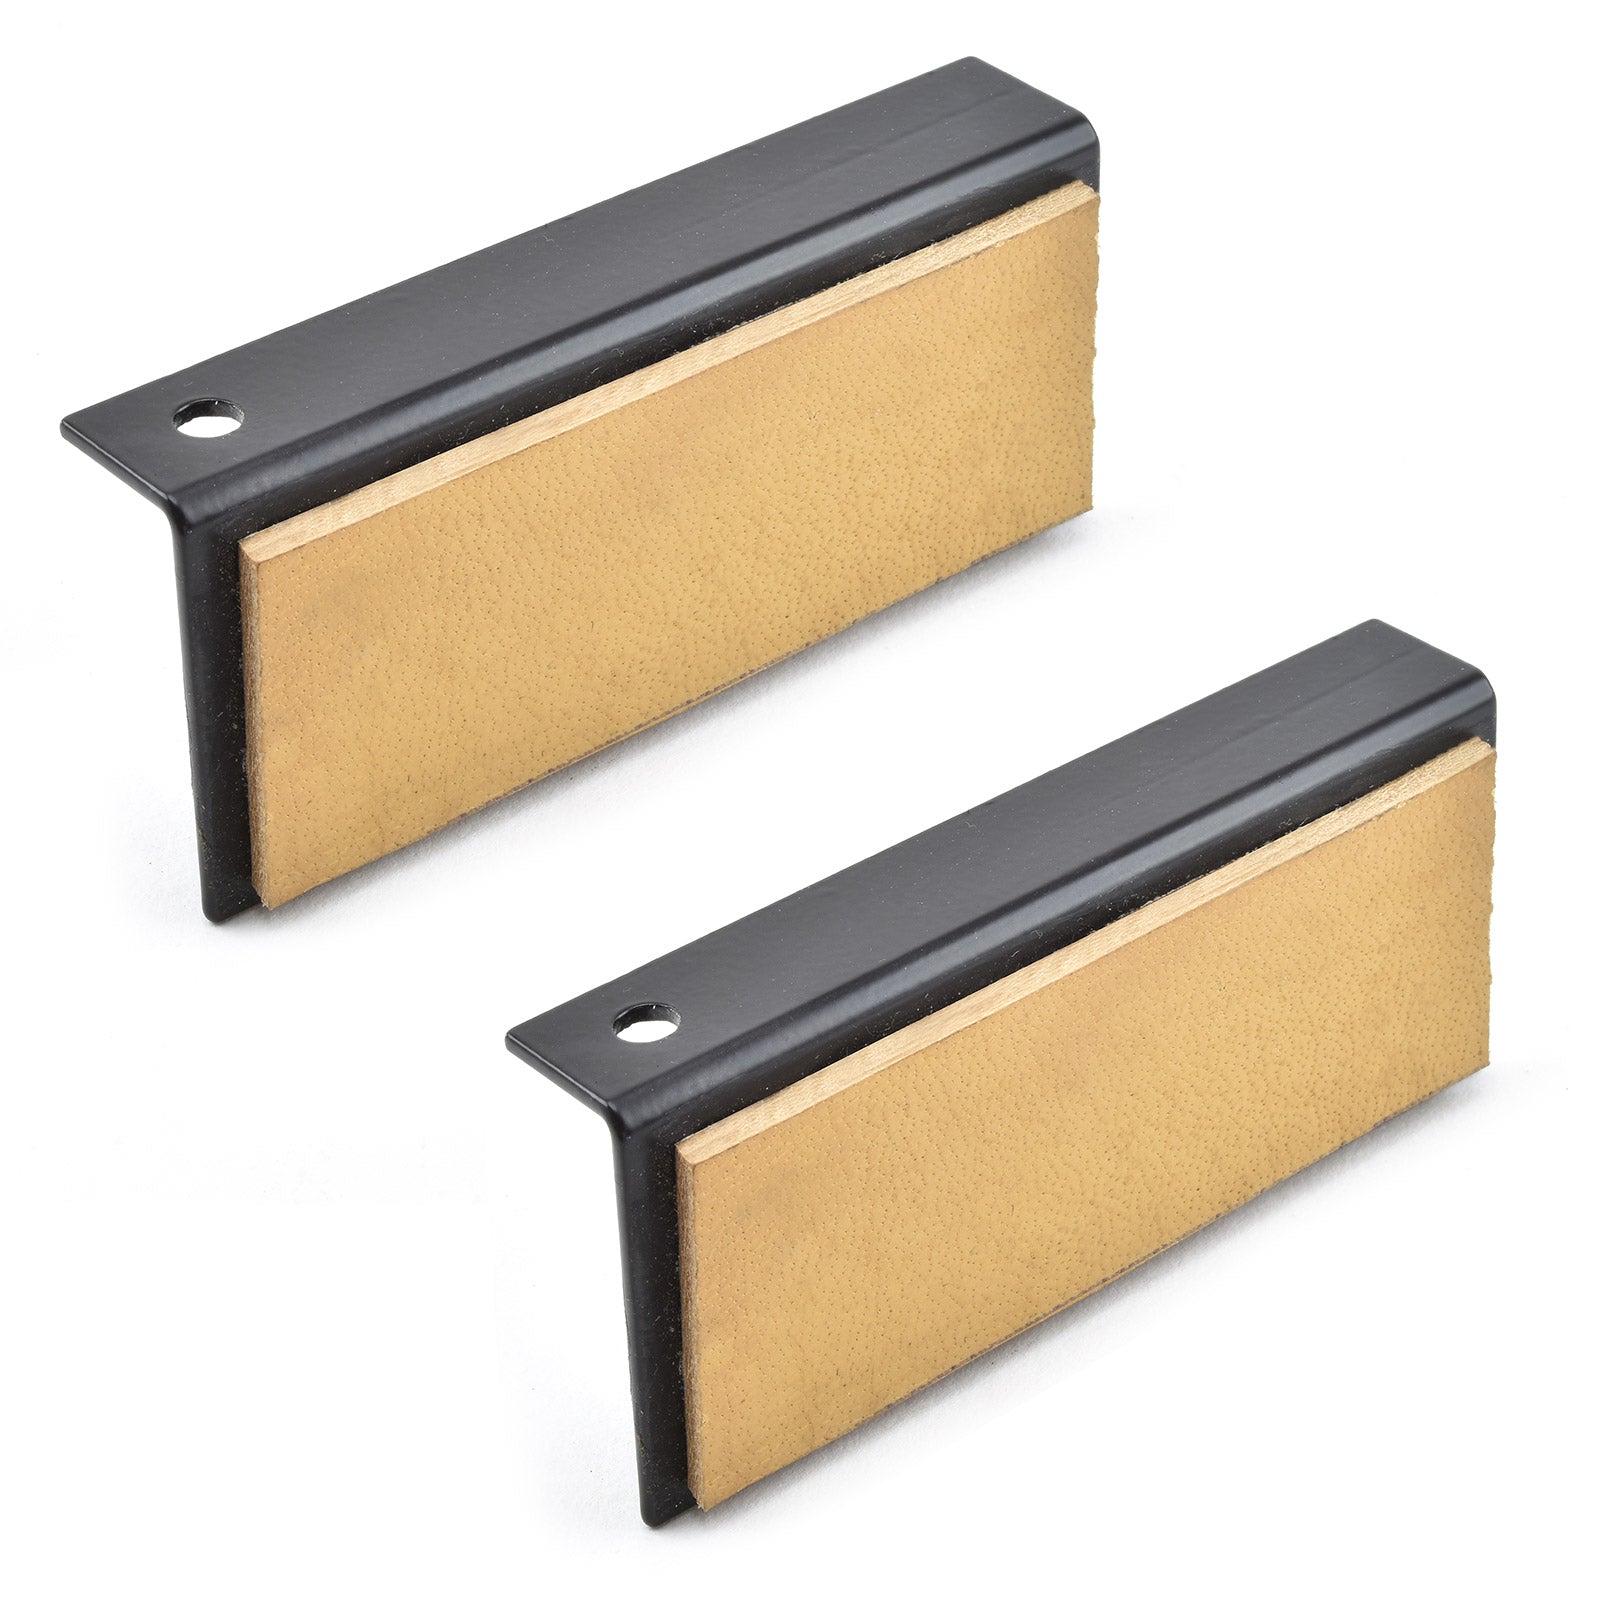 Leather - Lined Gentle Jaws for Vises, Set of 2 - Micro - Mark Vises